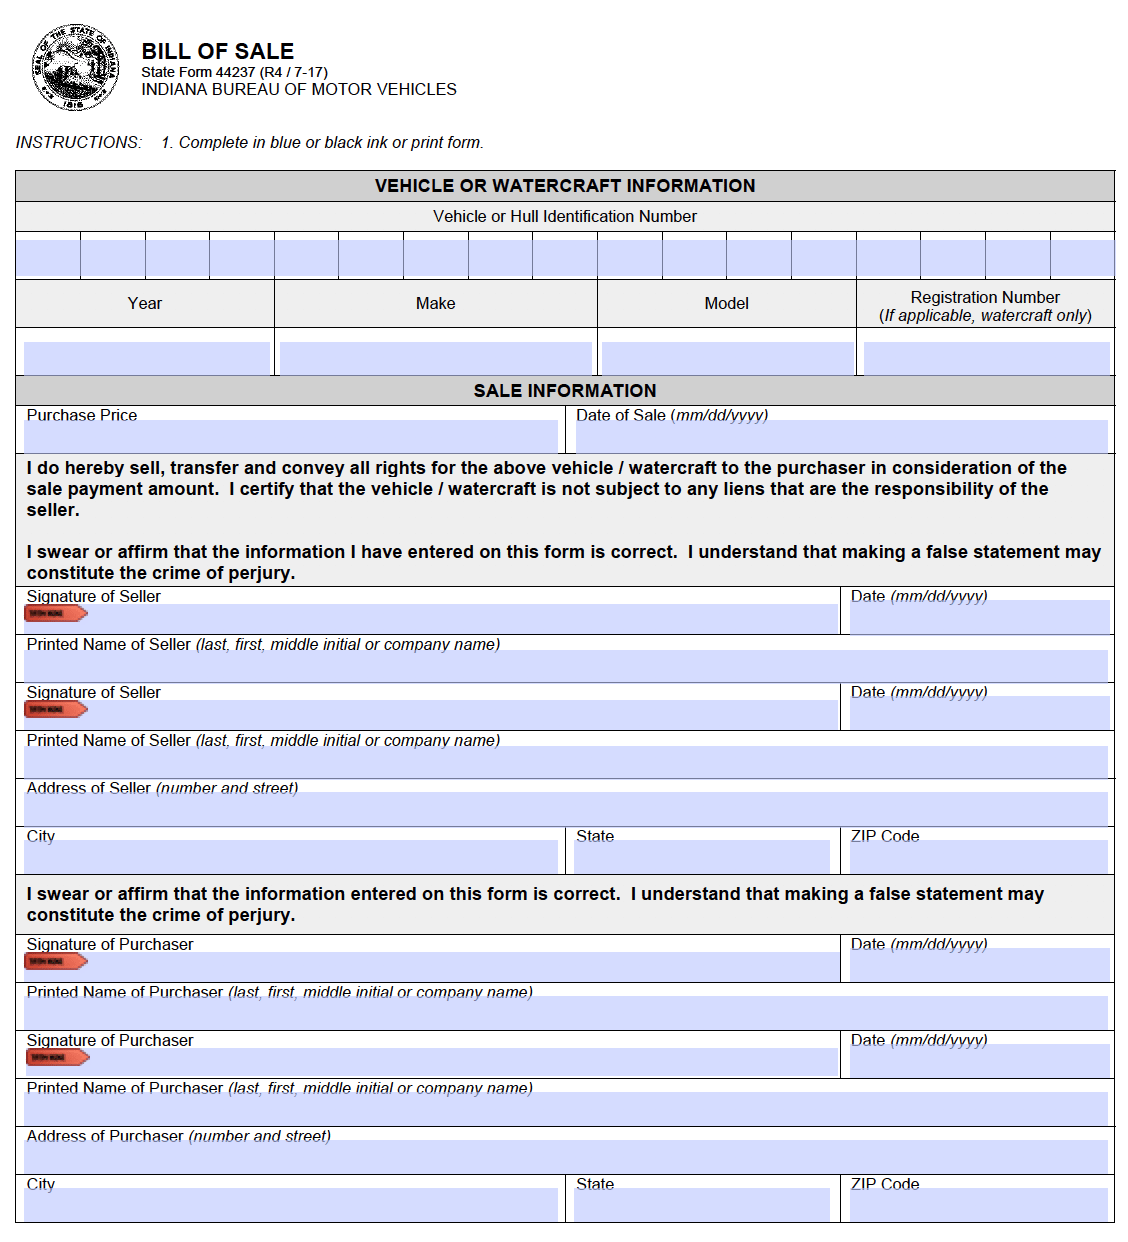 free-indiana-dmv-bill-of-sale-form-for-motor-vehicle-trailer-or